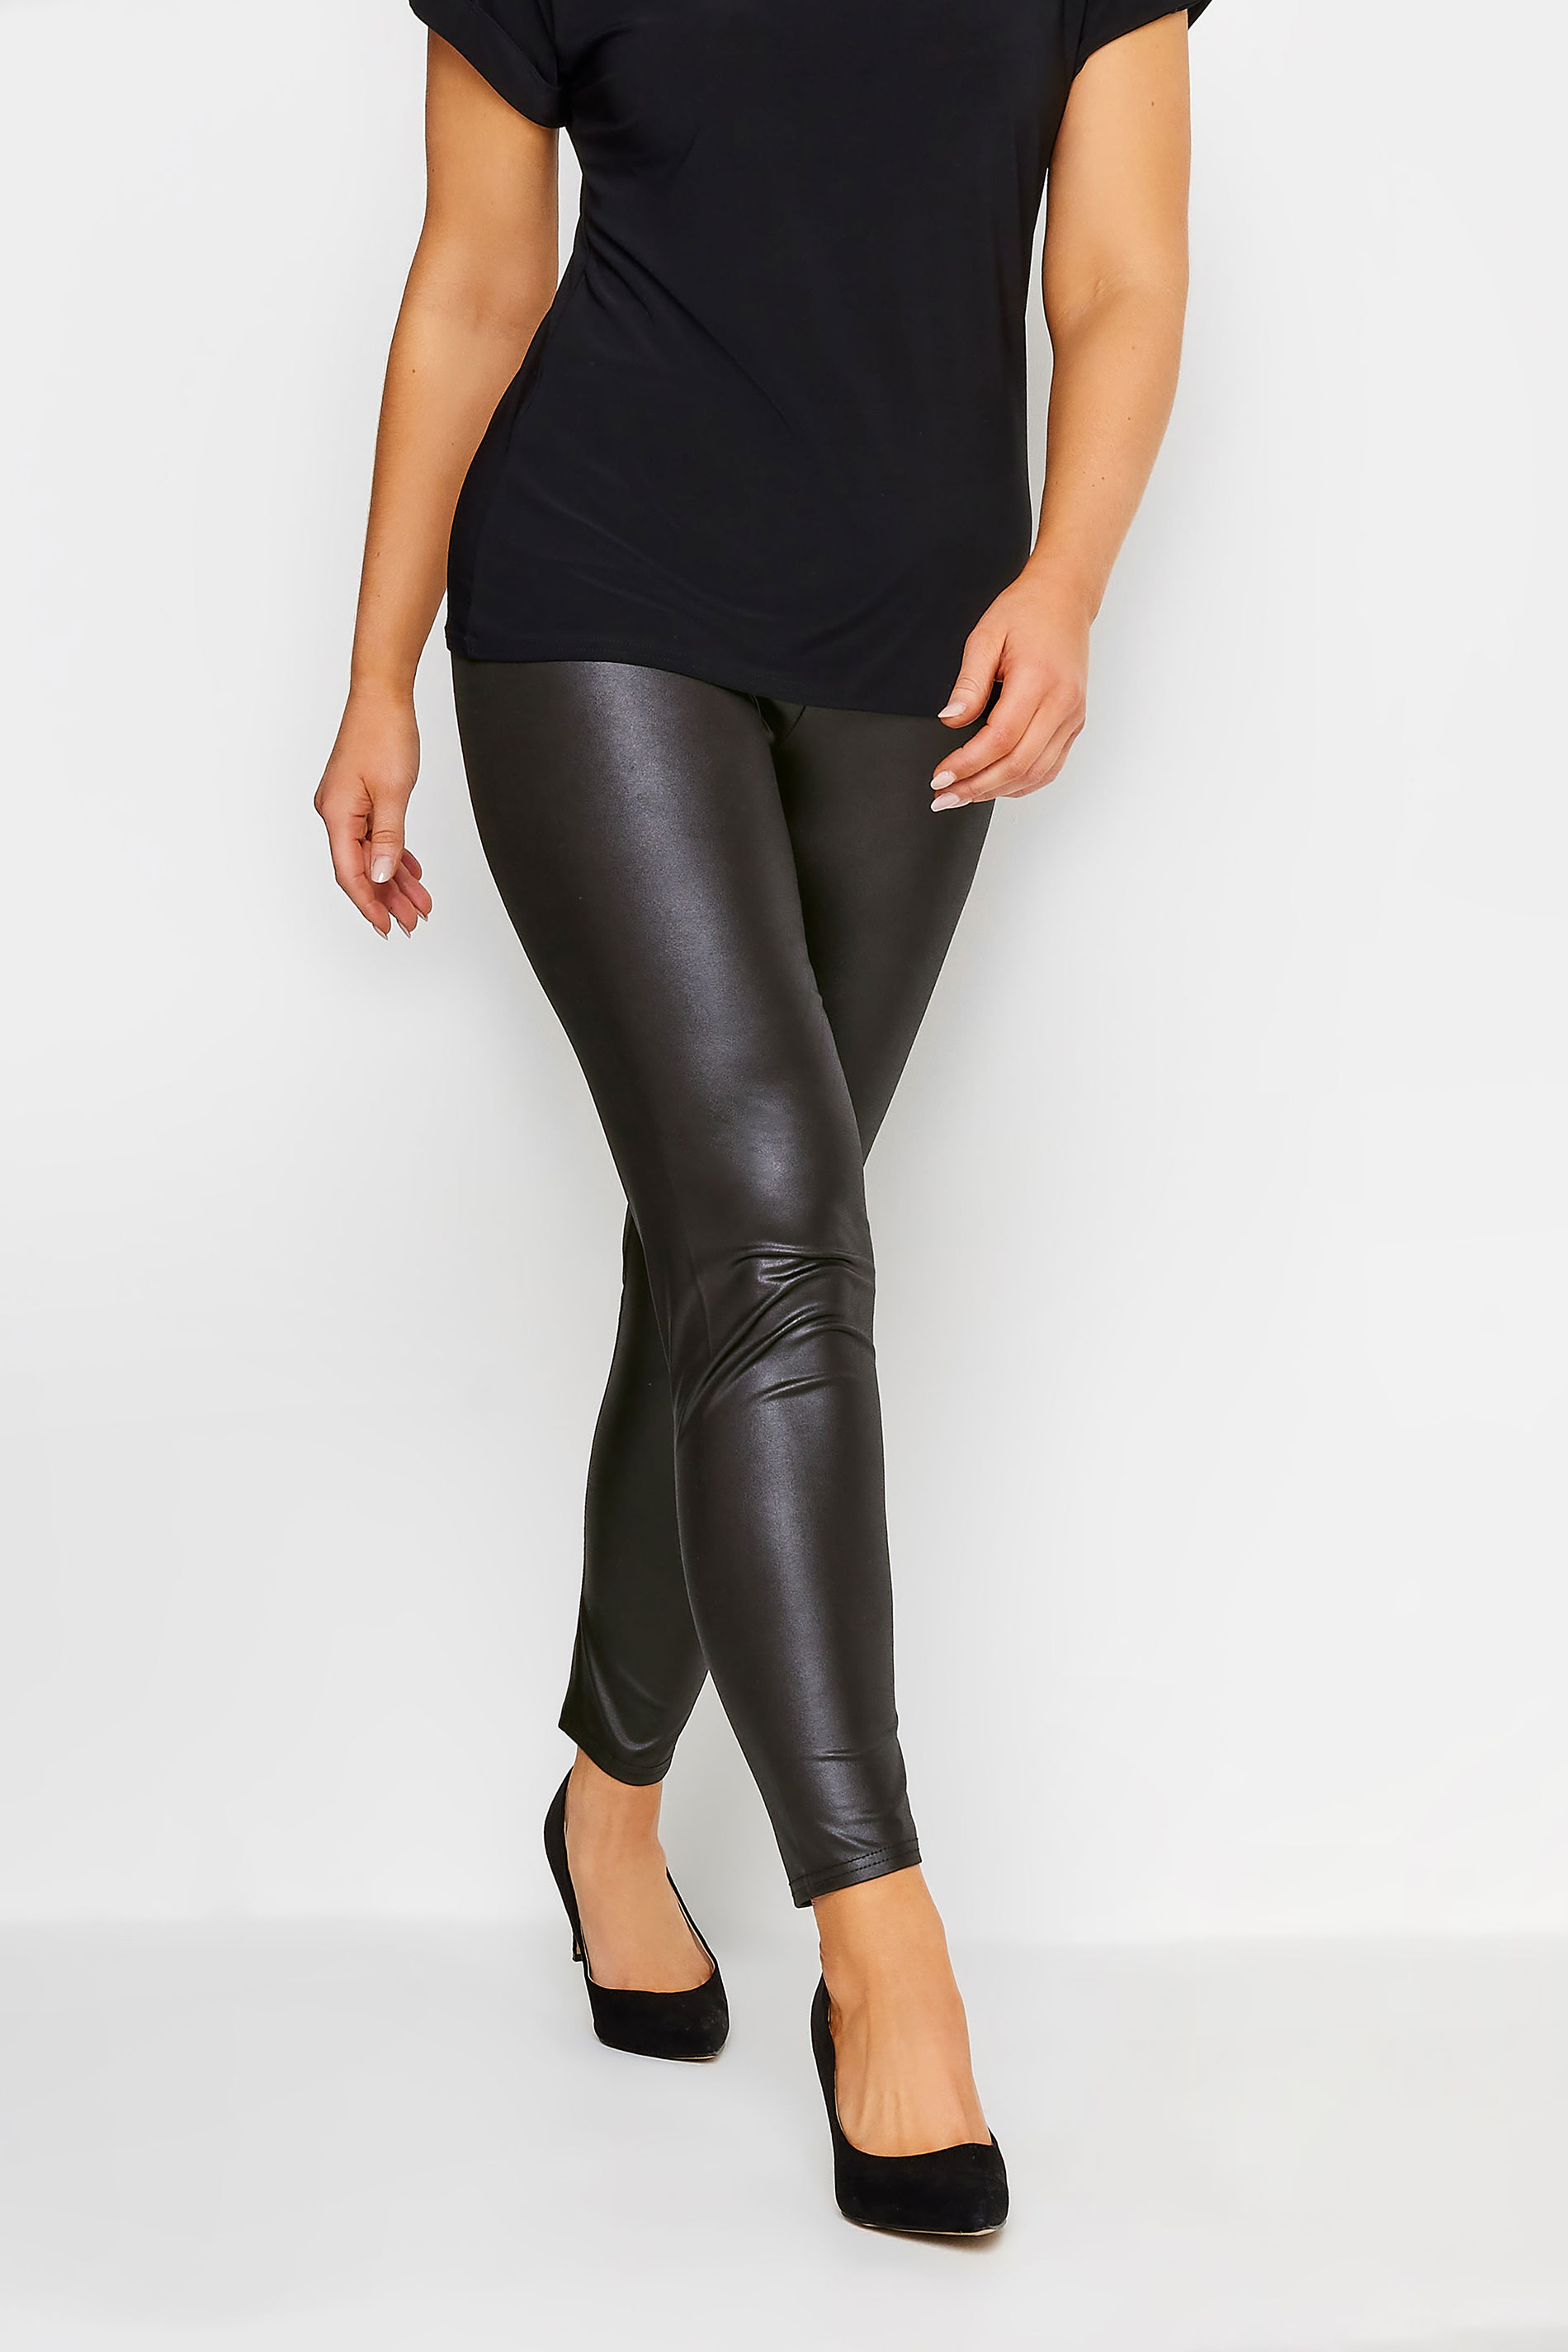 Black Wet Look Jeggings - Buy Fashion Wholesale in The UK